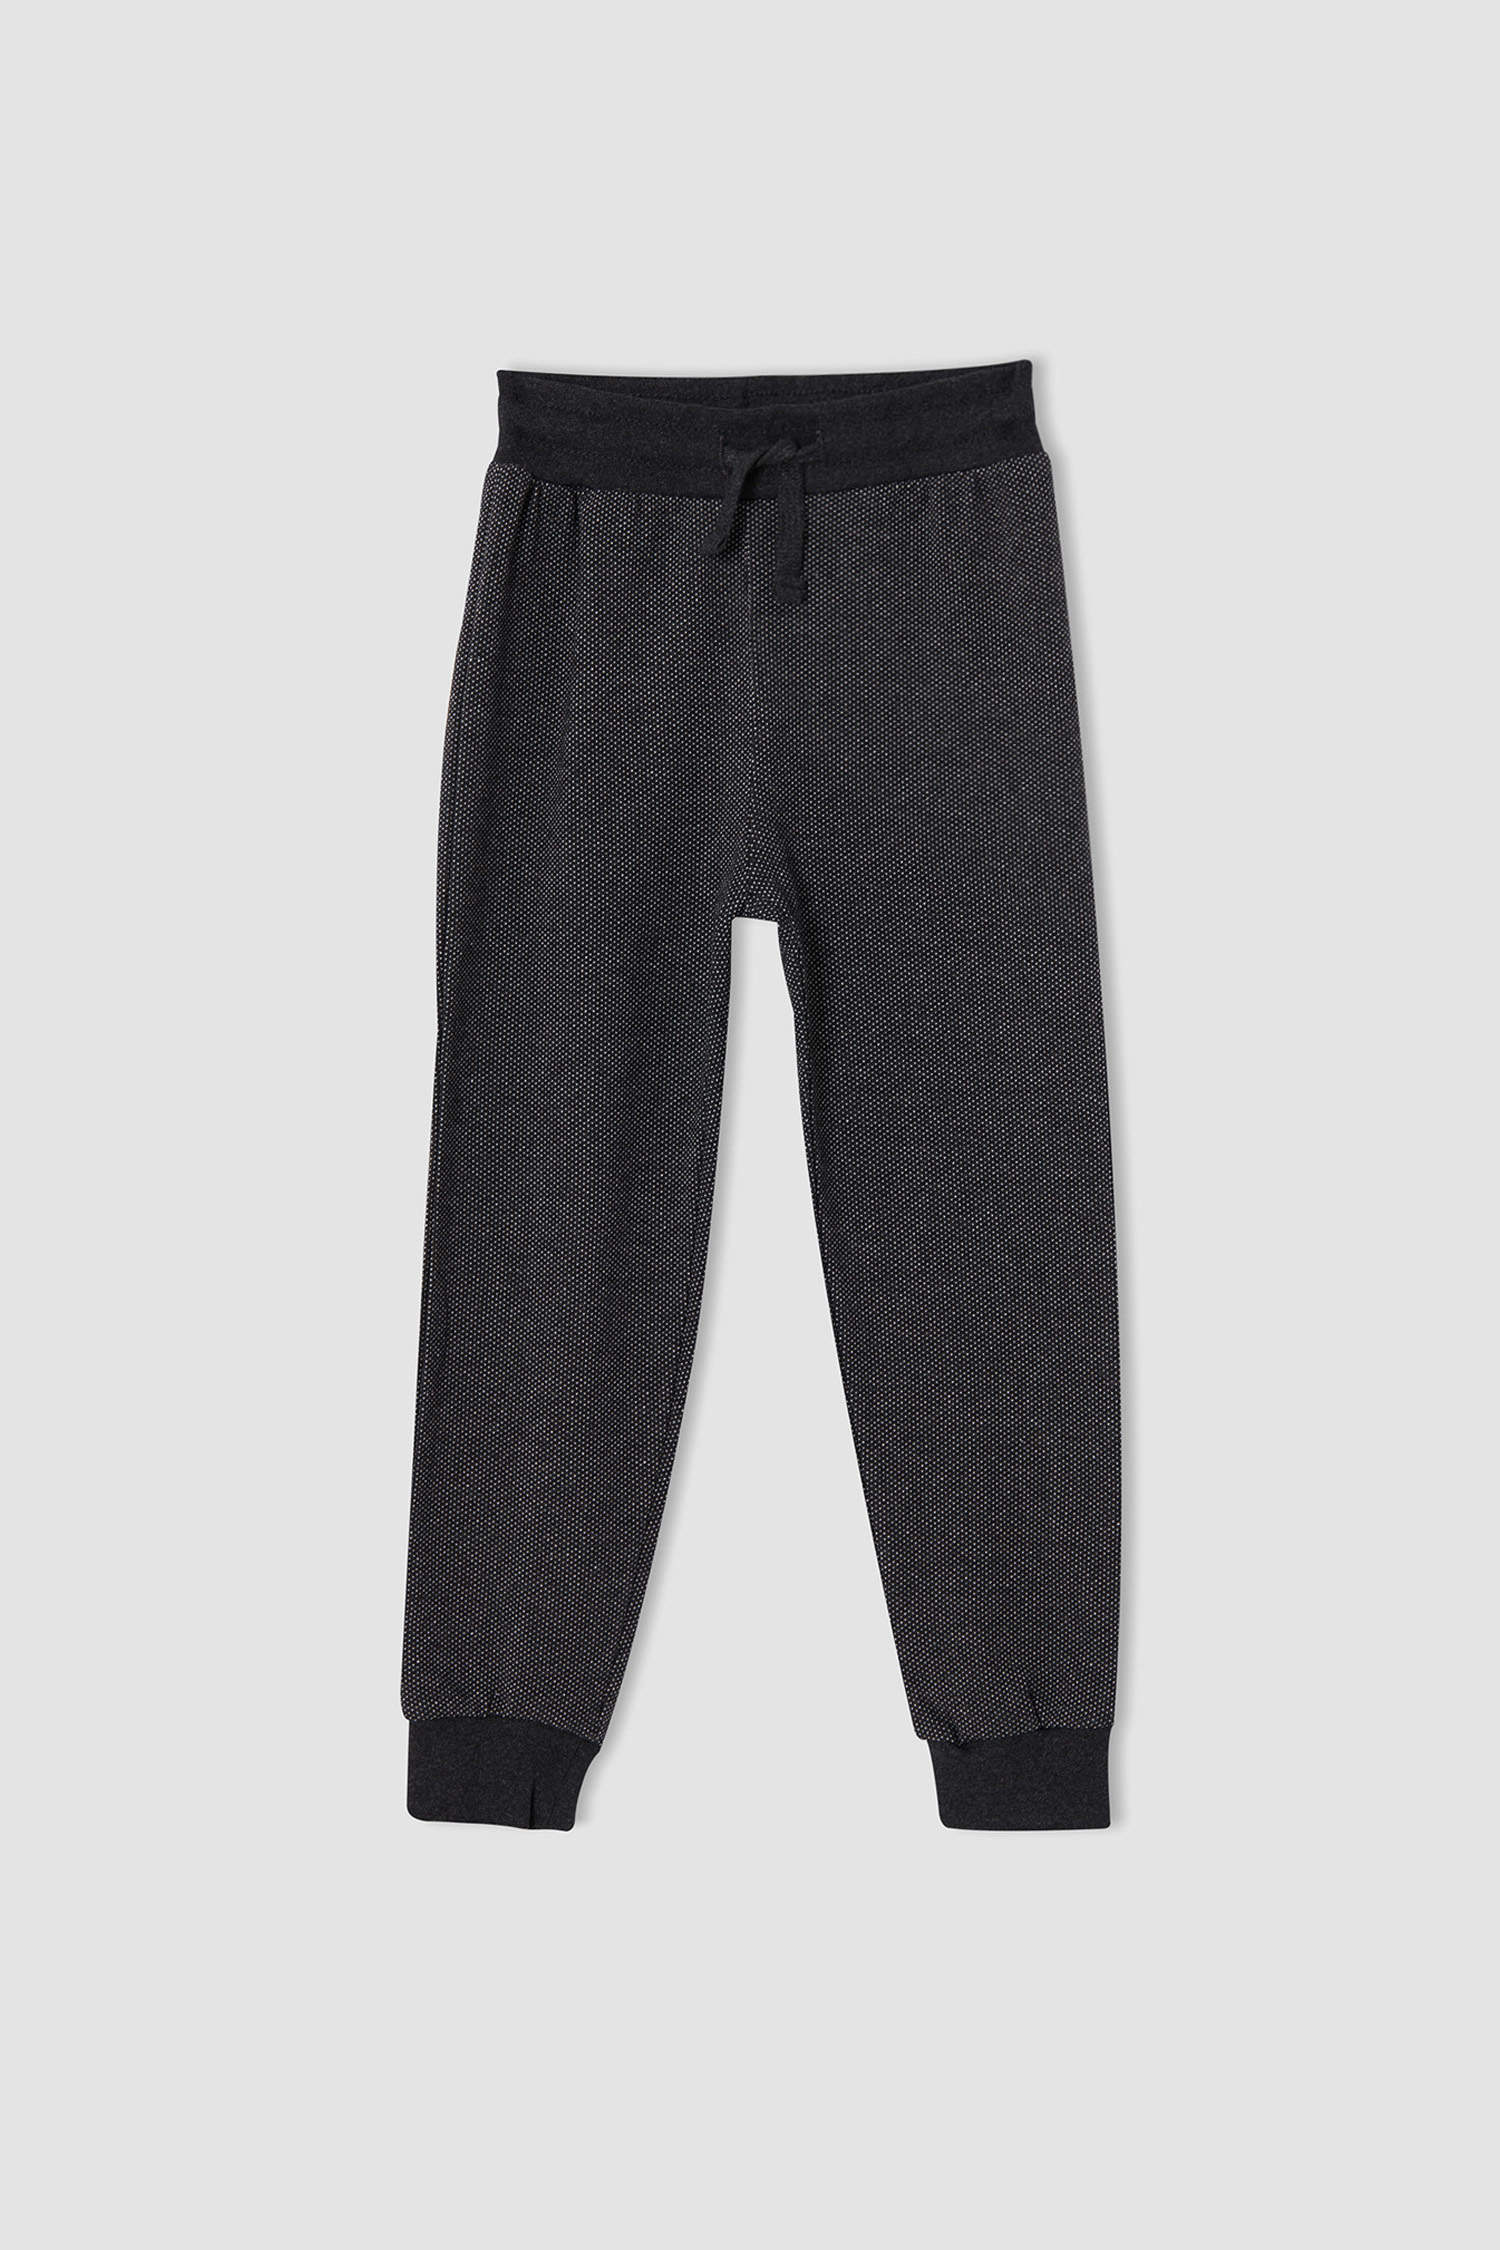 Anthracite BOYS & TEENS Boy Trousers 1816241 | DeFacto